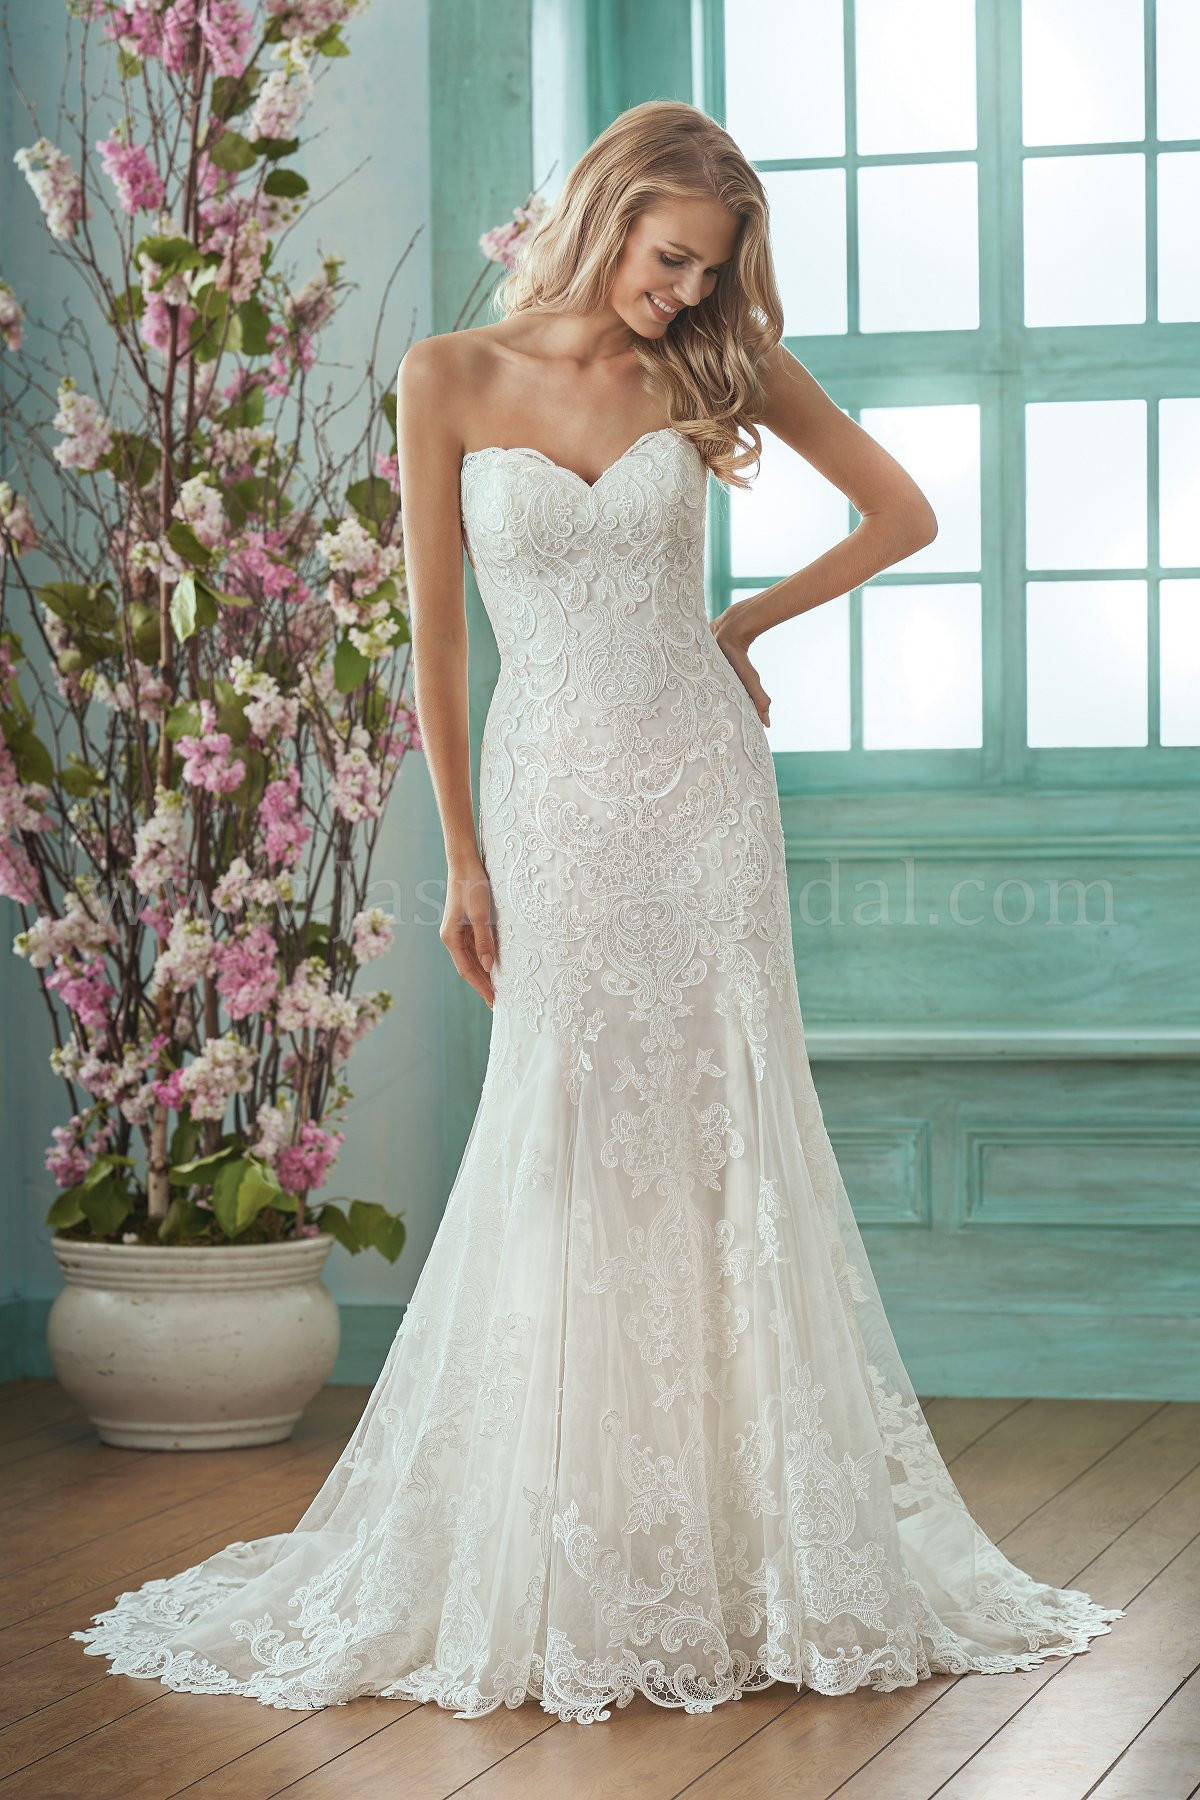 Strapless Wedding Gowns
 F Sweetheart Strapless Embroidered Lace & Silky